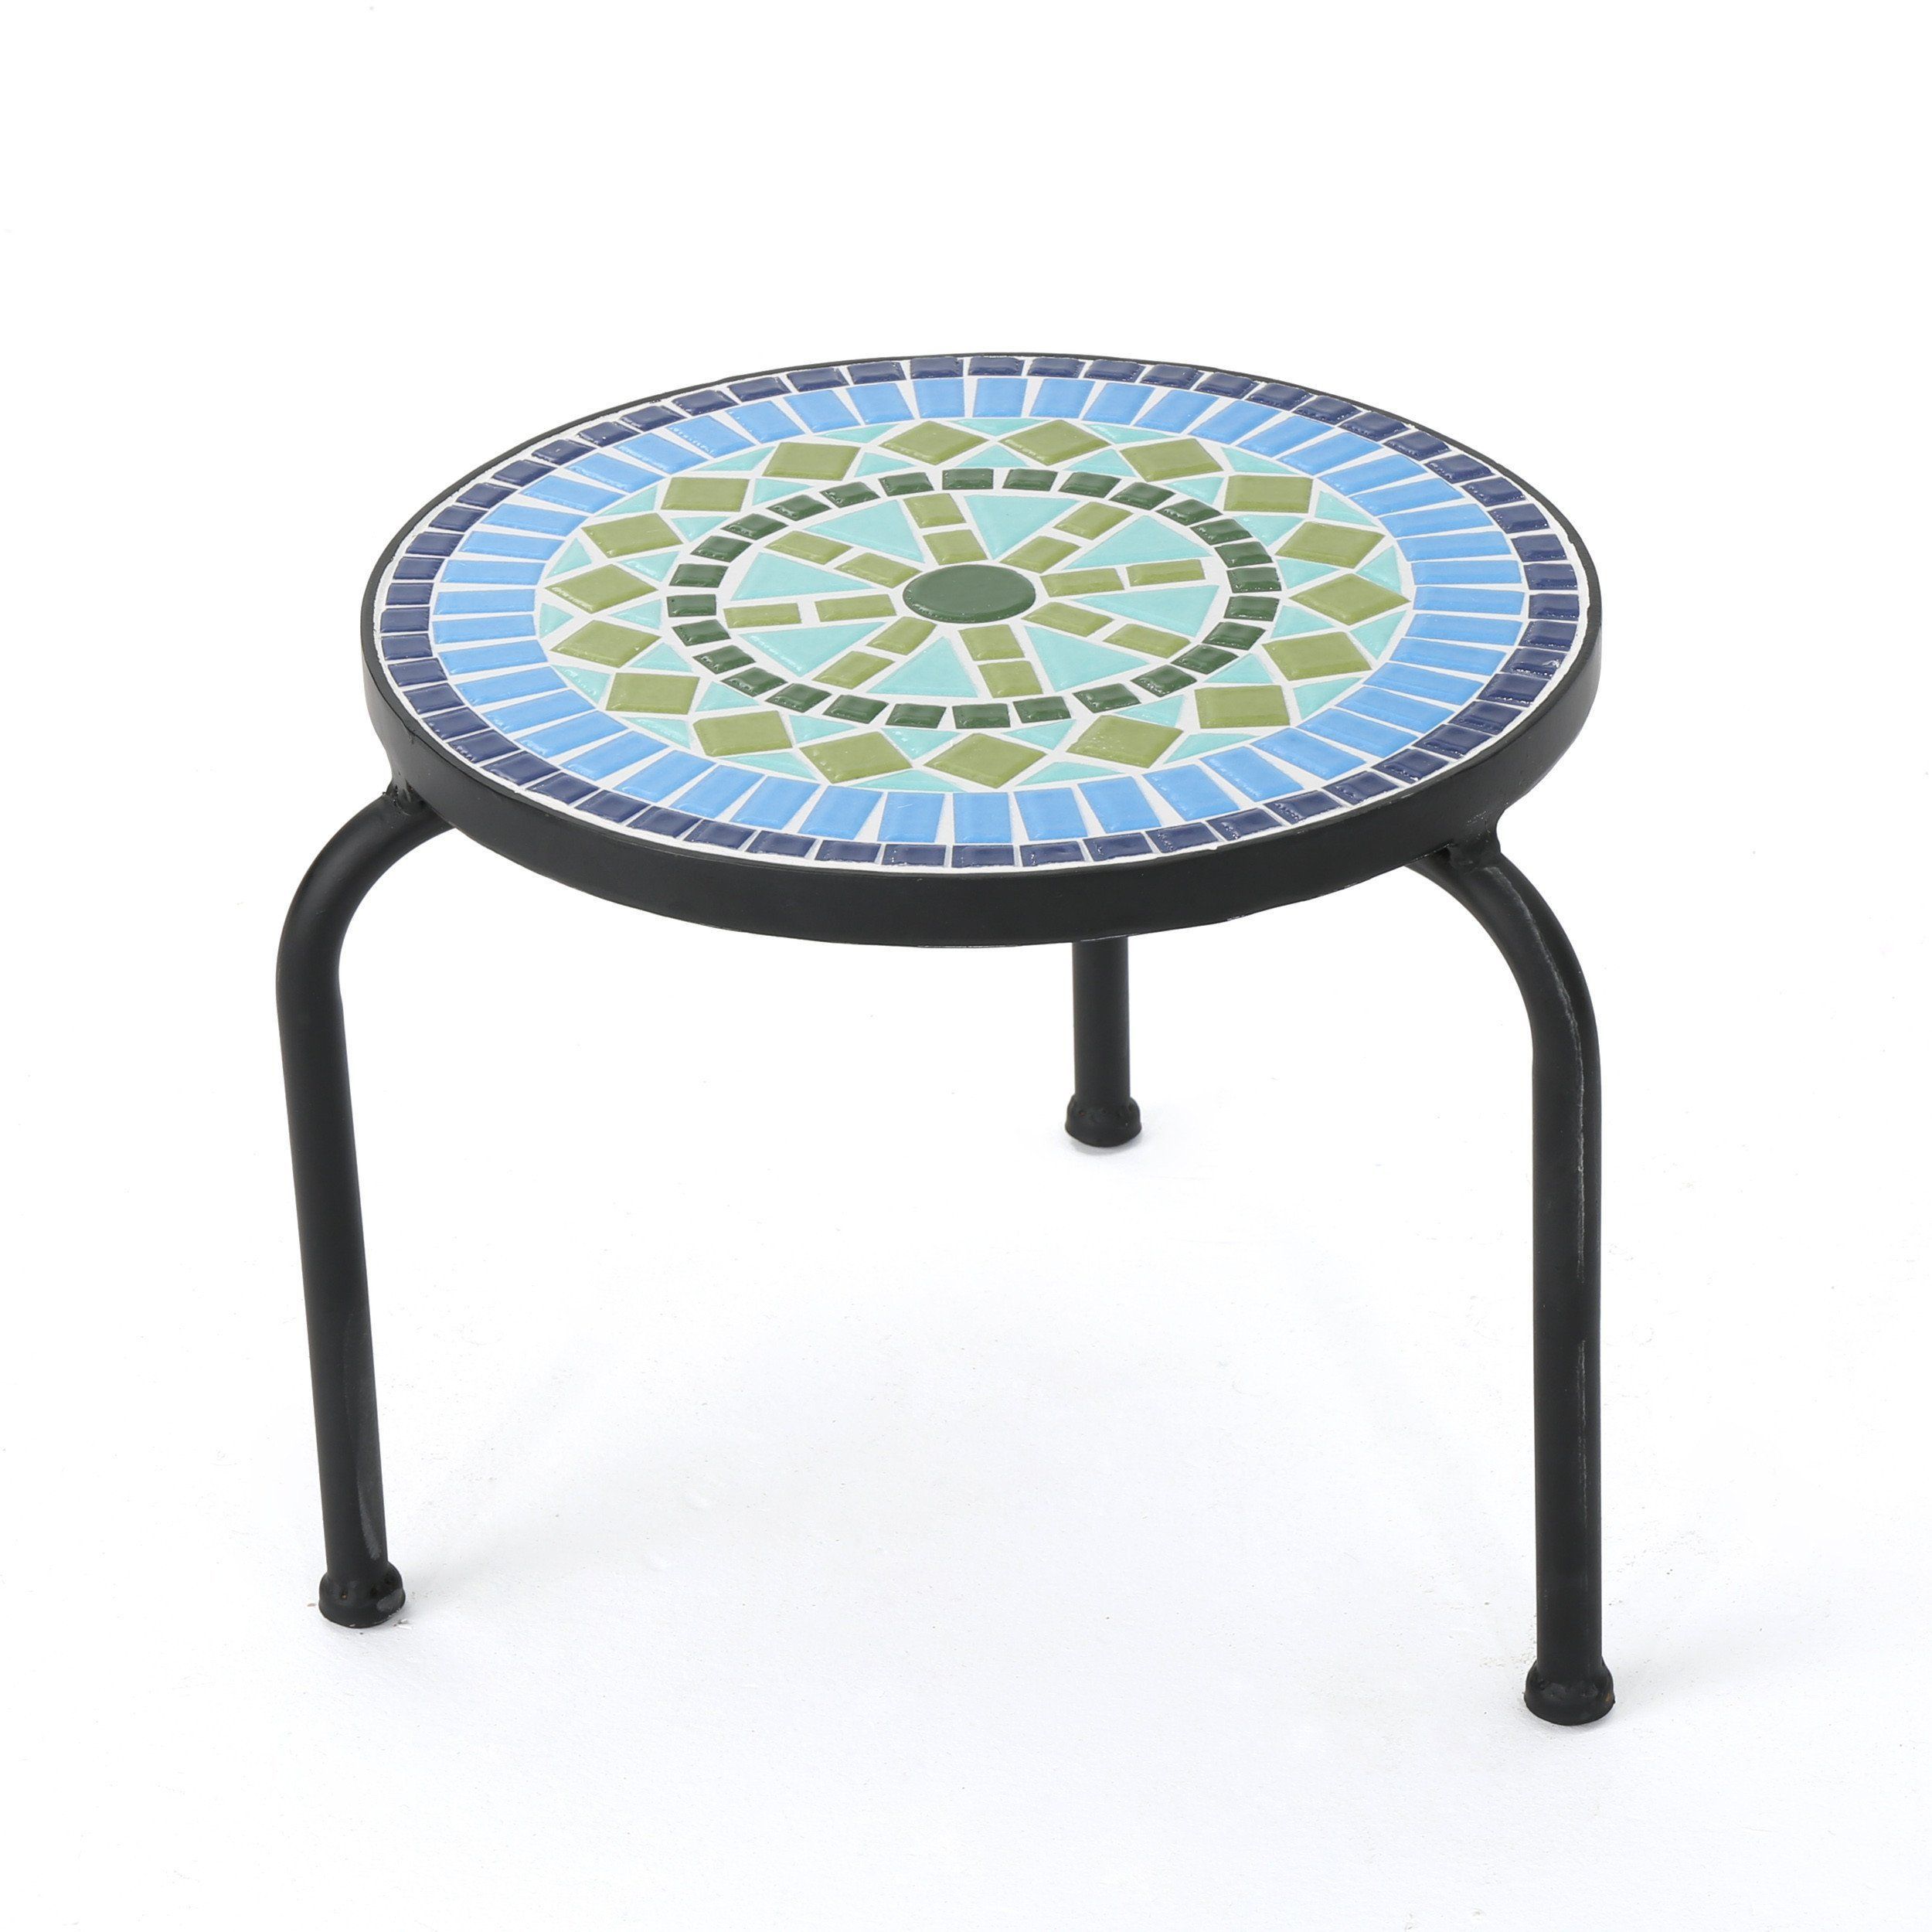 patio diy moroccan small tables mexican side table outdoor mosaic ceramic tile chantel blue delightful full size yellow lamp acrylic nesting end linen runner metal outside